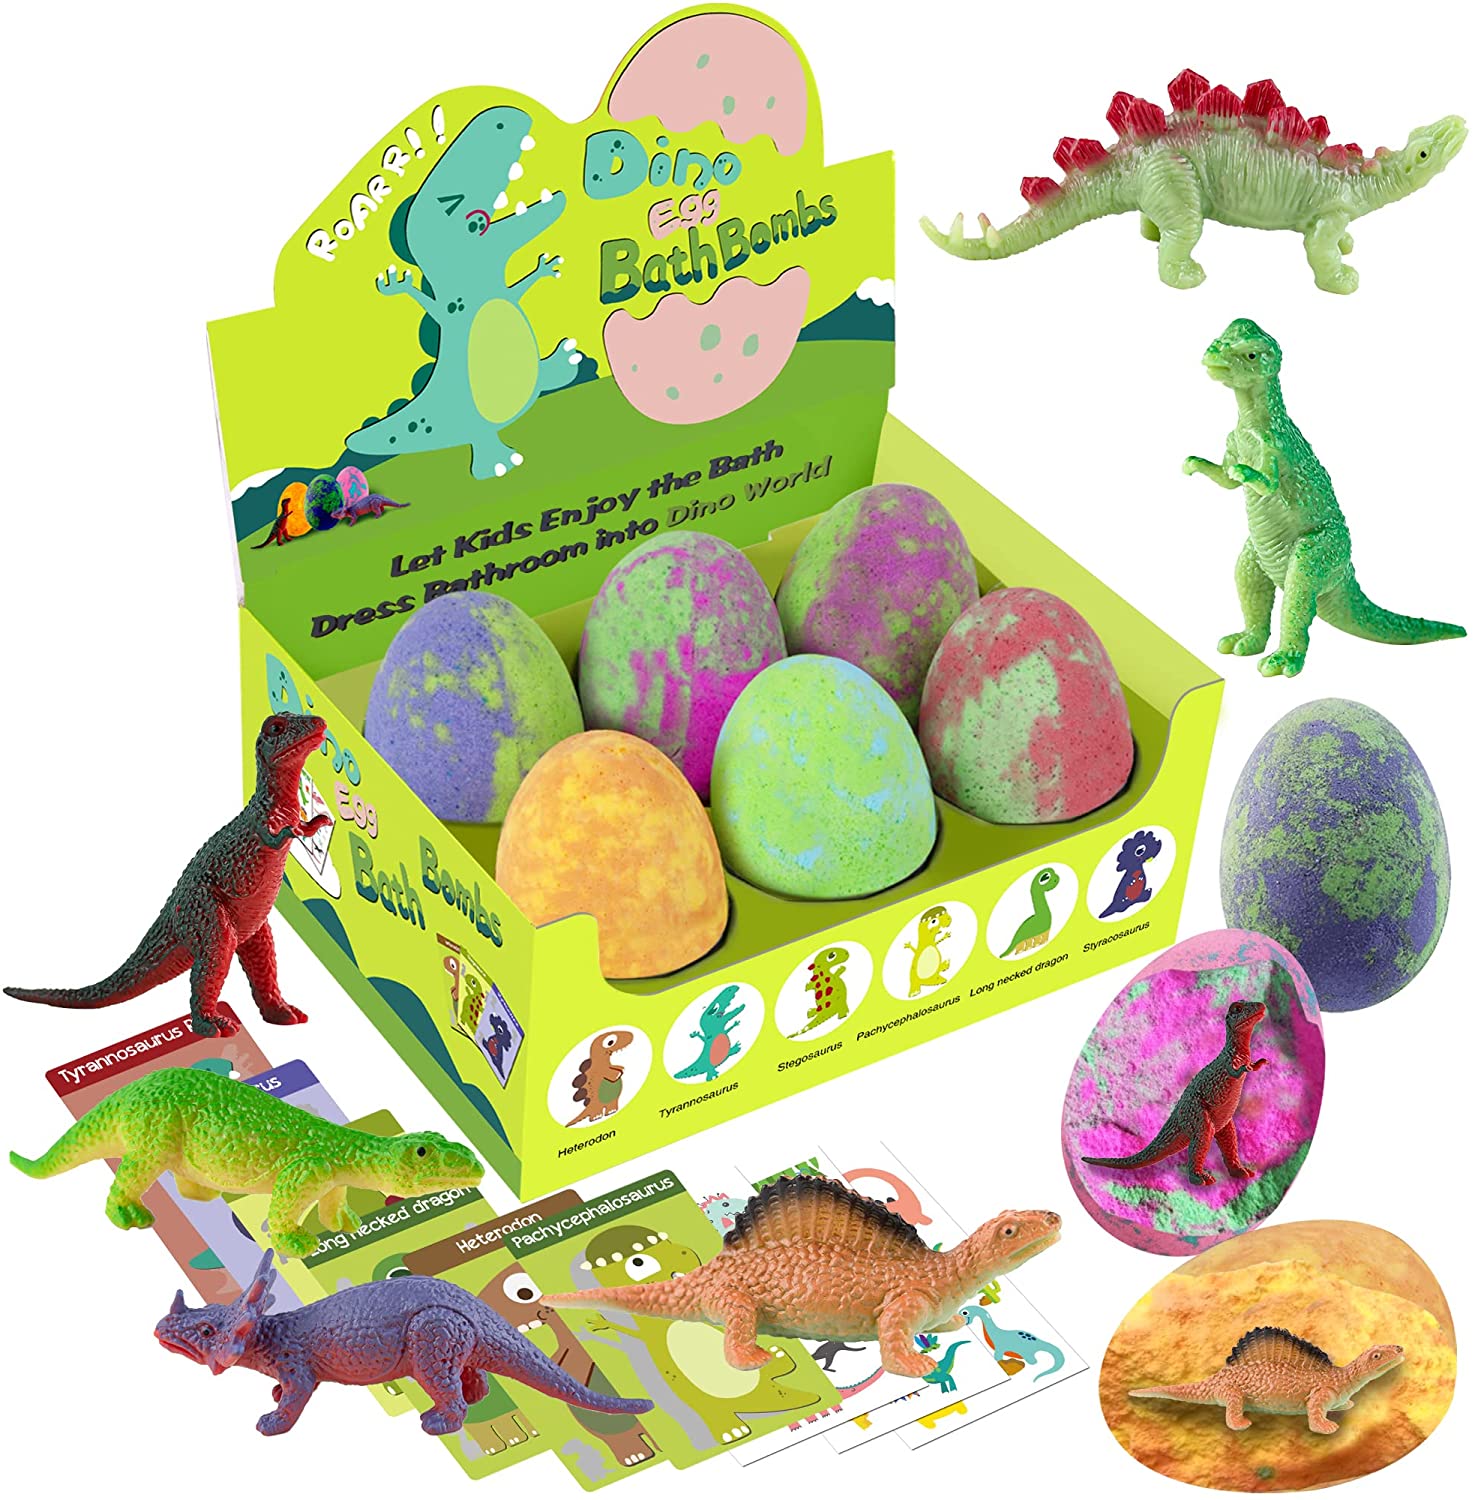 Wholesale Bath Bombs For Kids With Surprise Toys Inside Supplier And Manufacturer